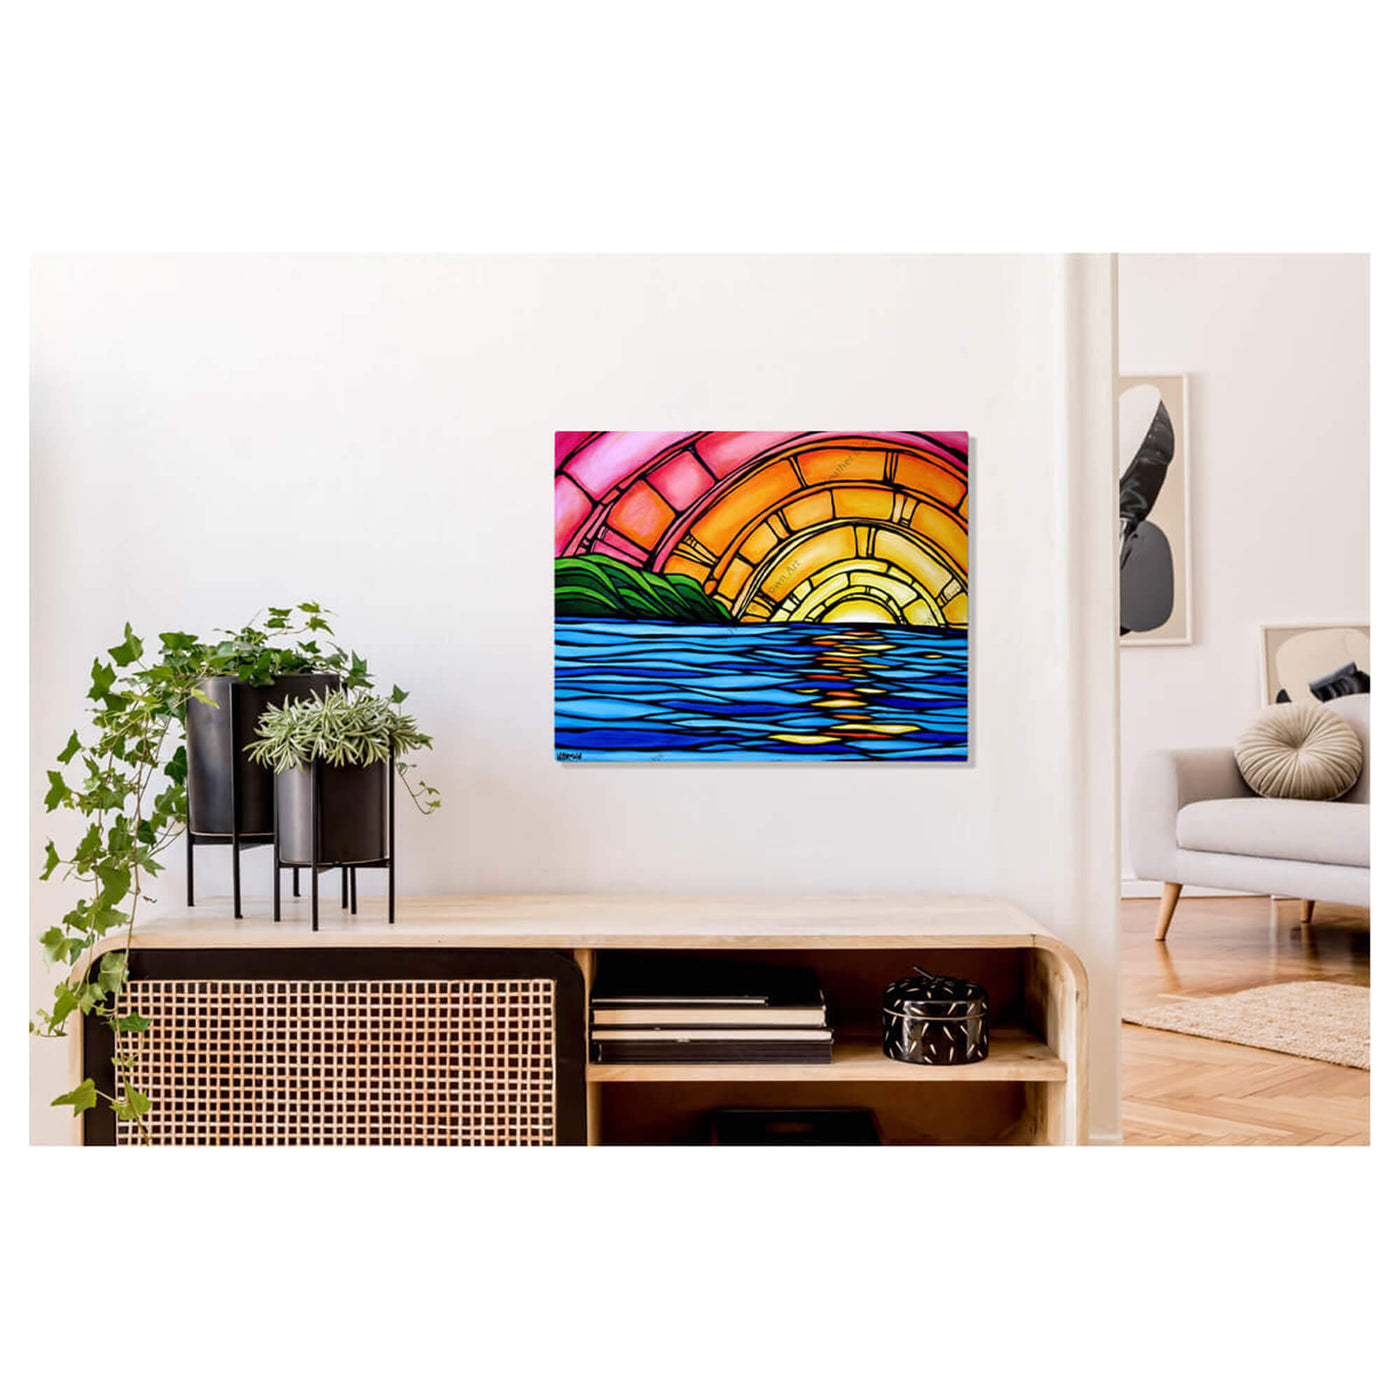 A metal art print featuring a breathtaking sunset with bright pinks and oranges where the sun drifts down into the beautiful blue horizon by Hawaii surf artist Heather Brown